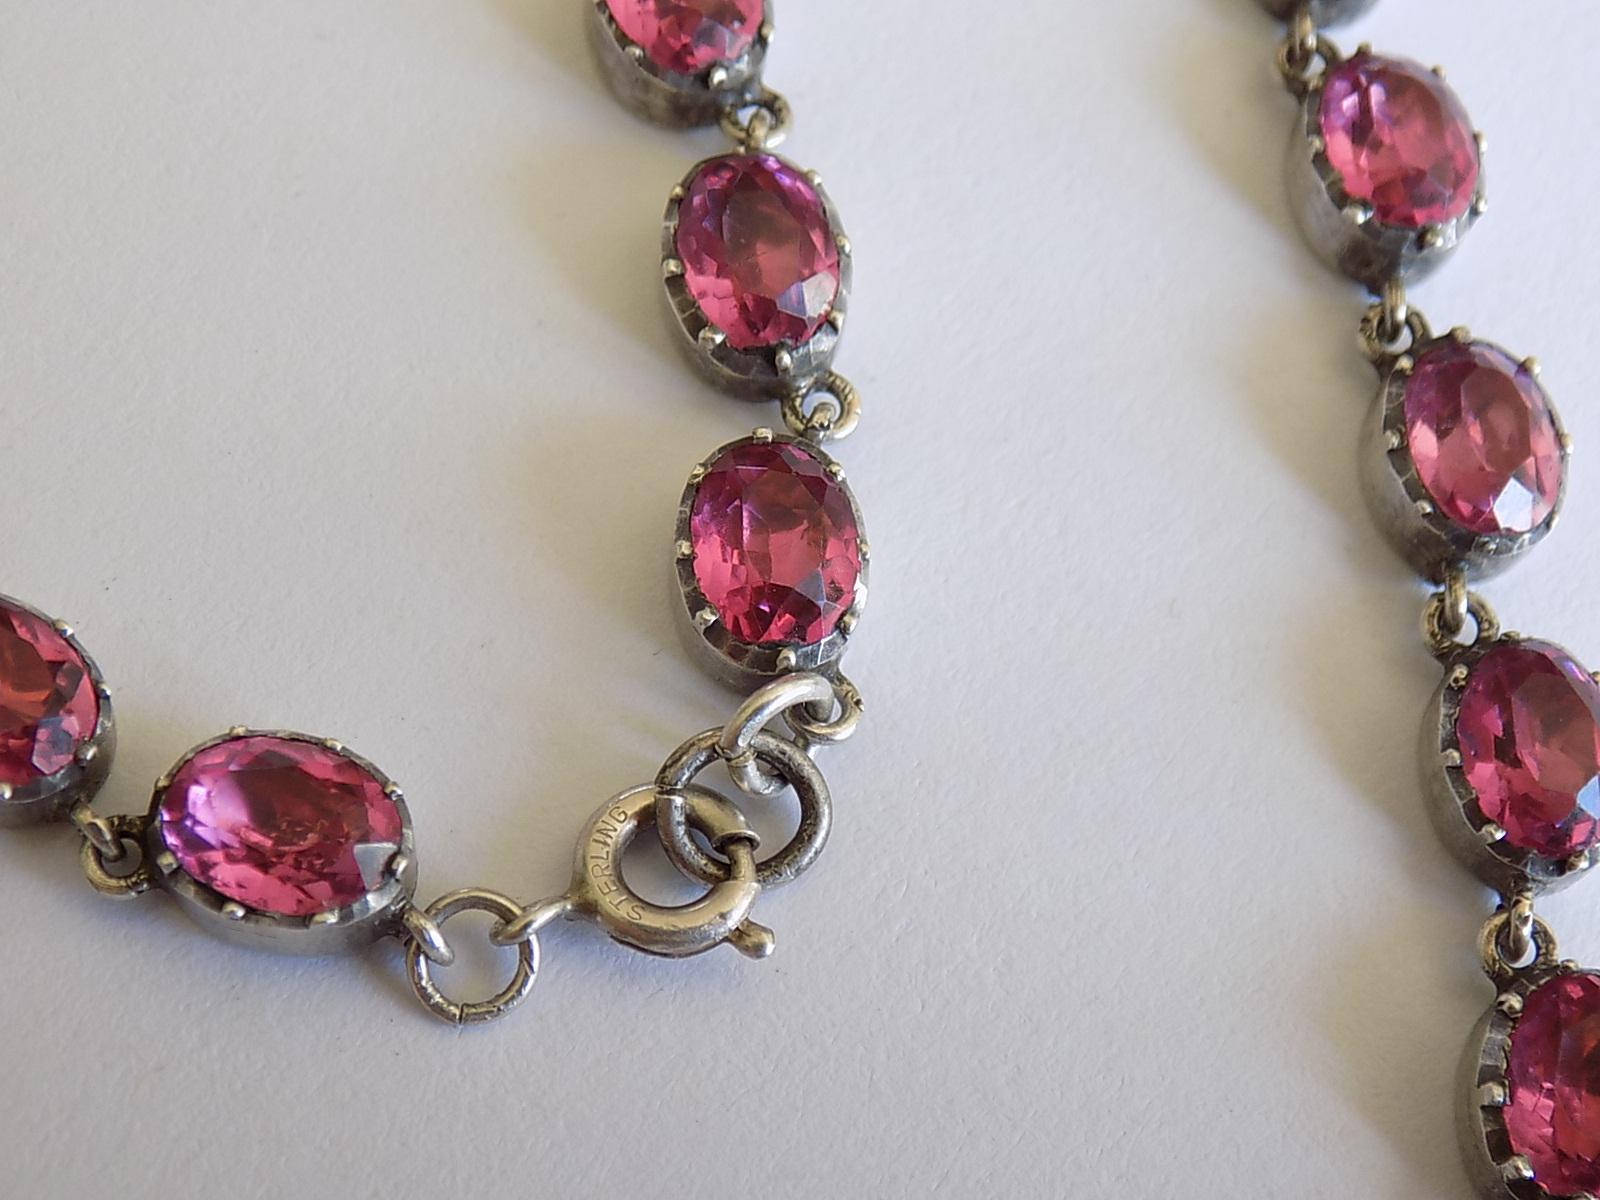 A Gorgeous Edwardian c.1900 Sterling Silver and Pink Paste (glass) Riviere necklace. The Paste in foiled closed back setting. English origin.
Marked: Sterling.
Length 40cm or 15.75